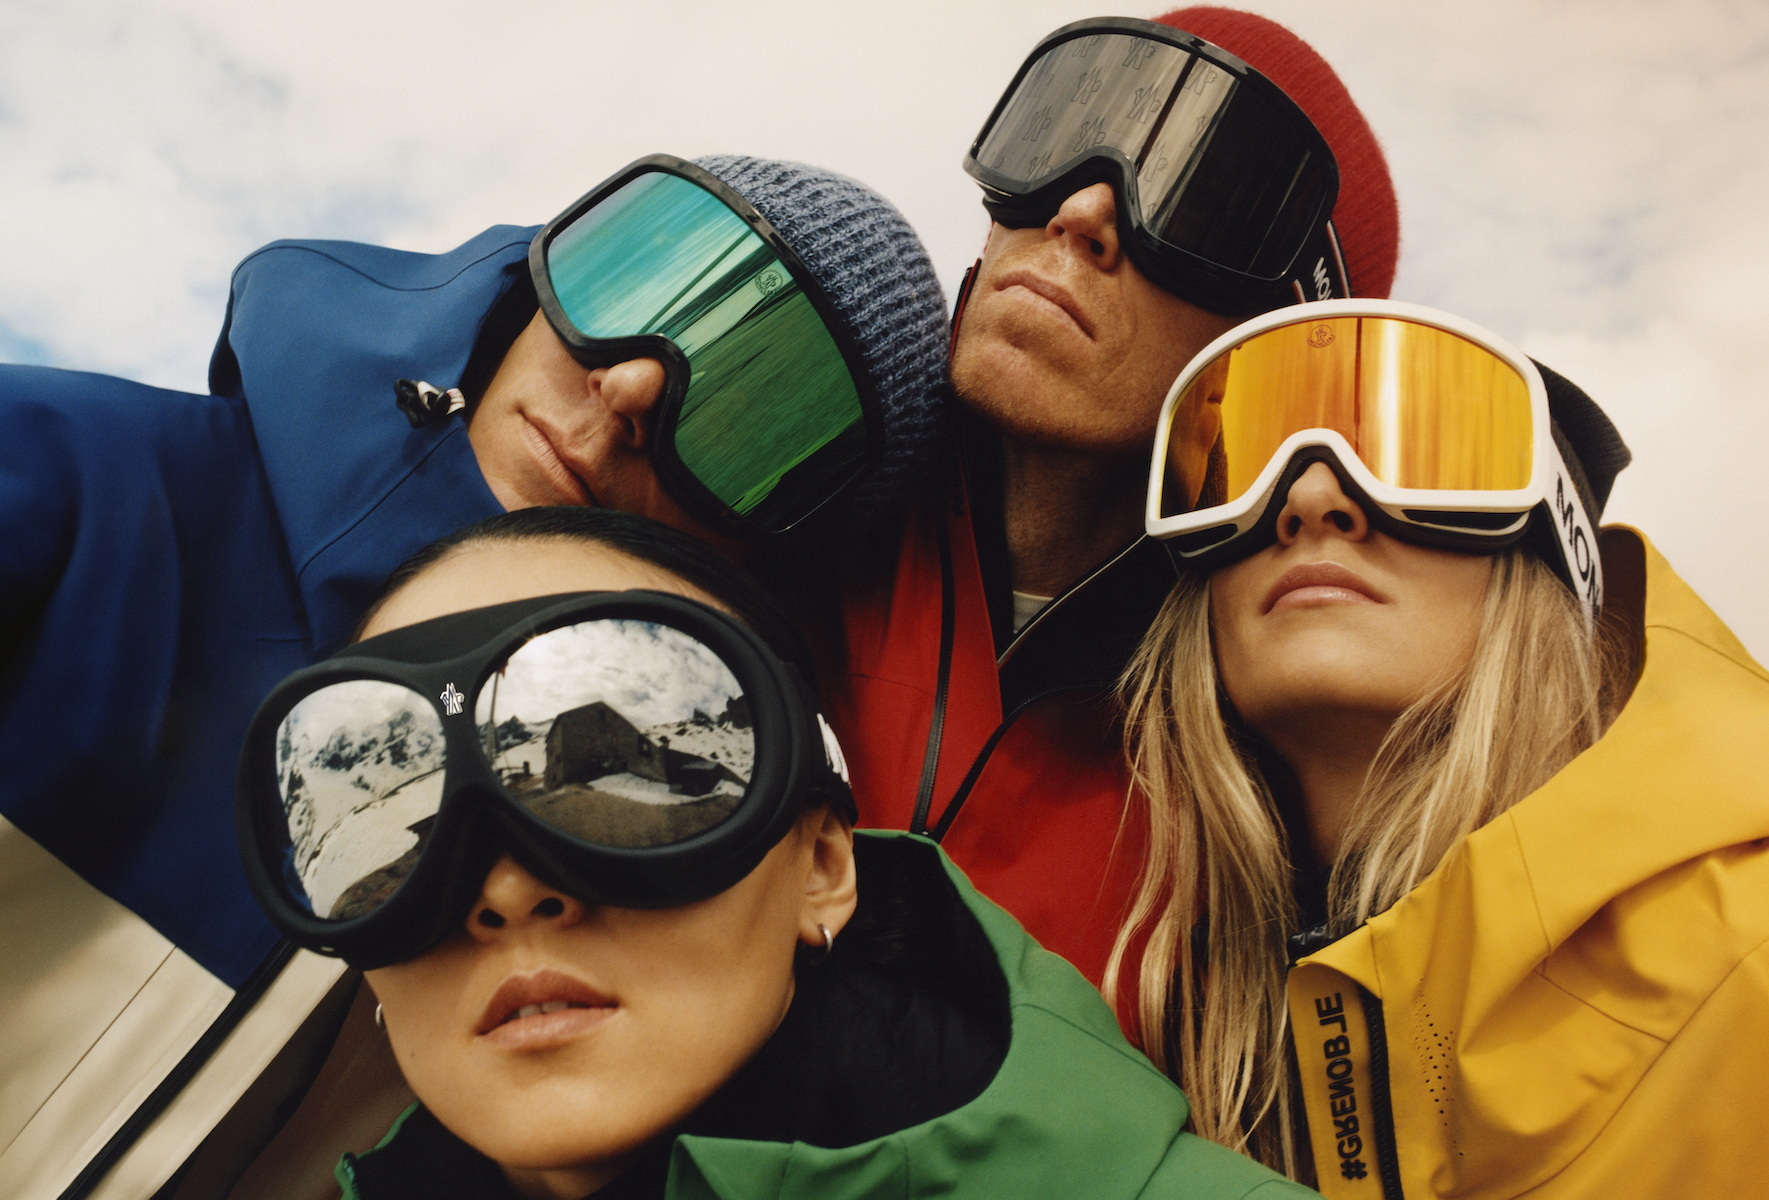 This Stylish New Skiwear Label Is Made for Women by Women